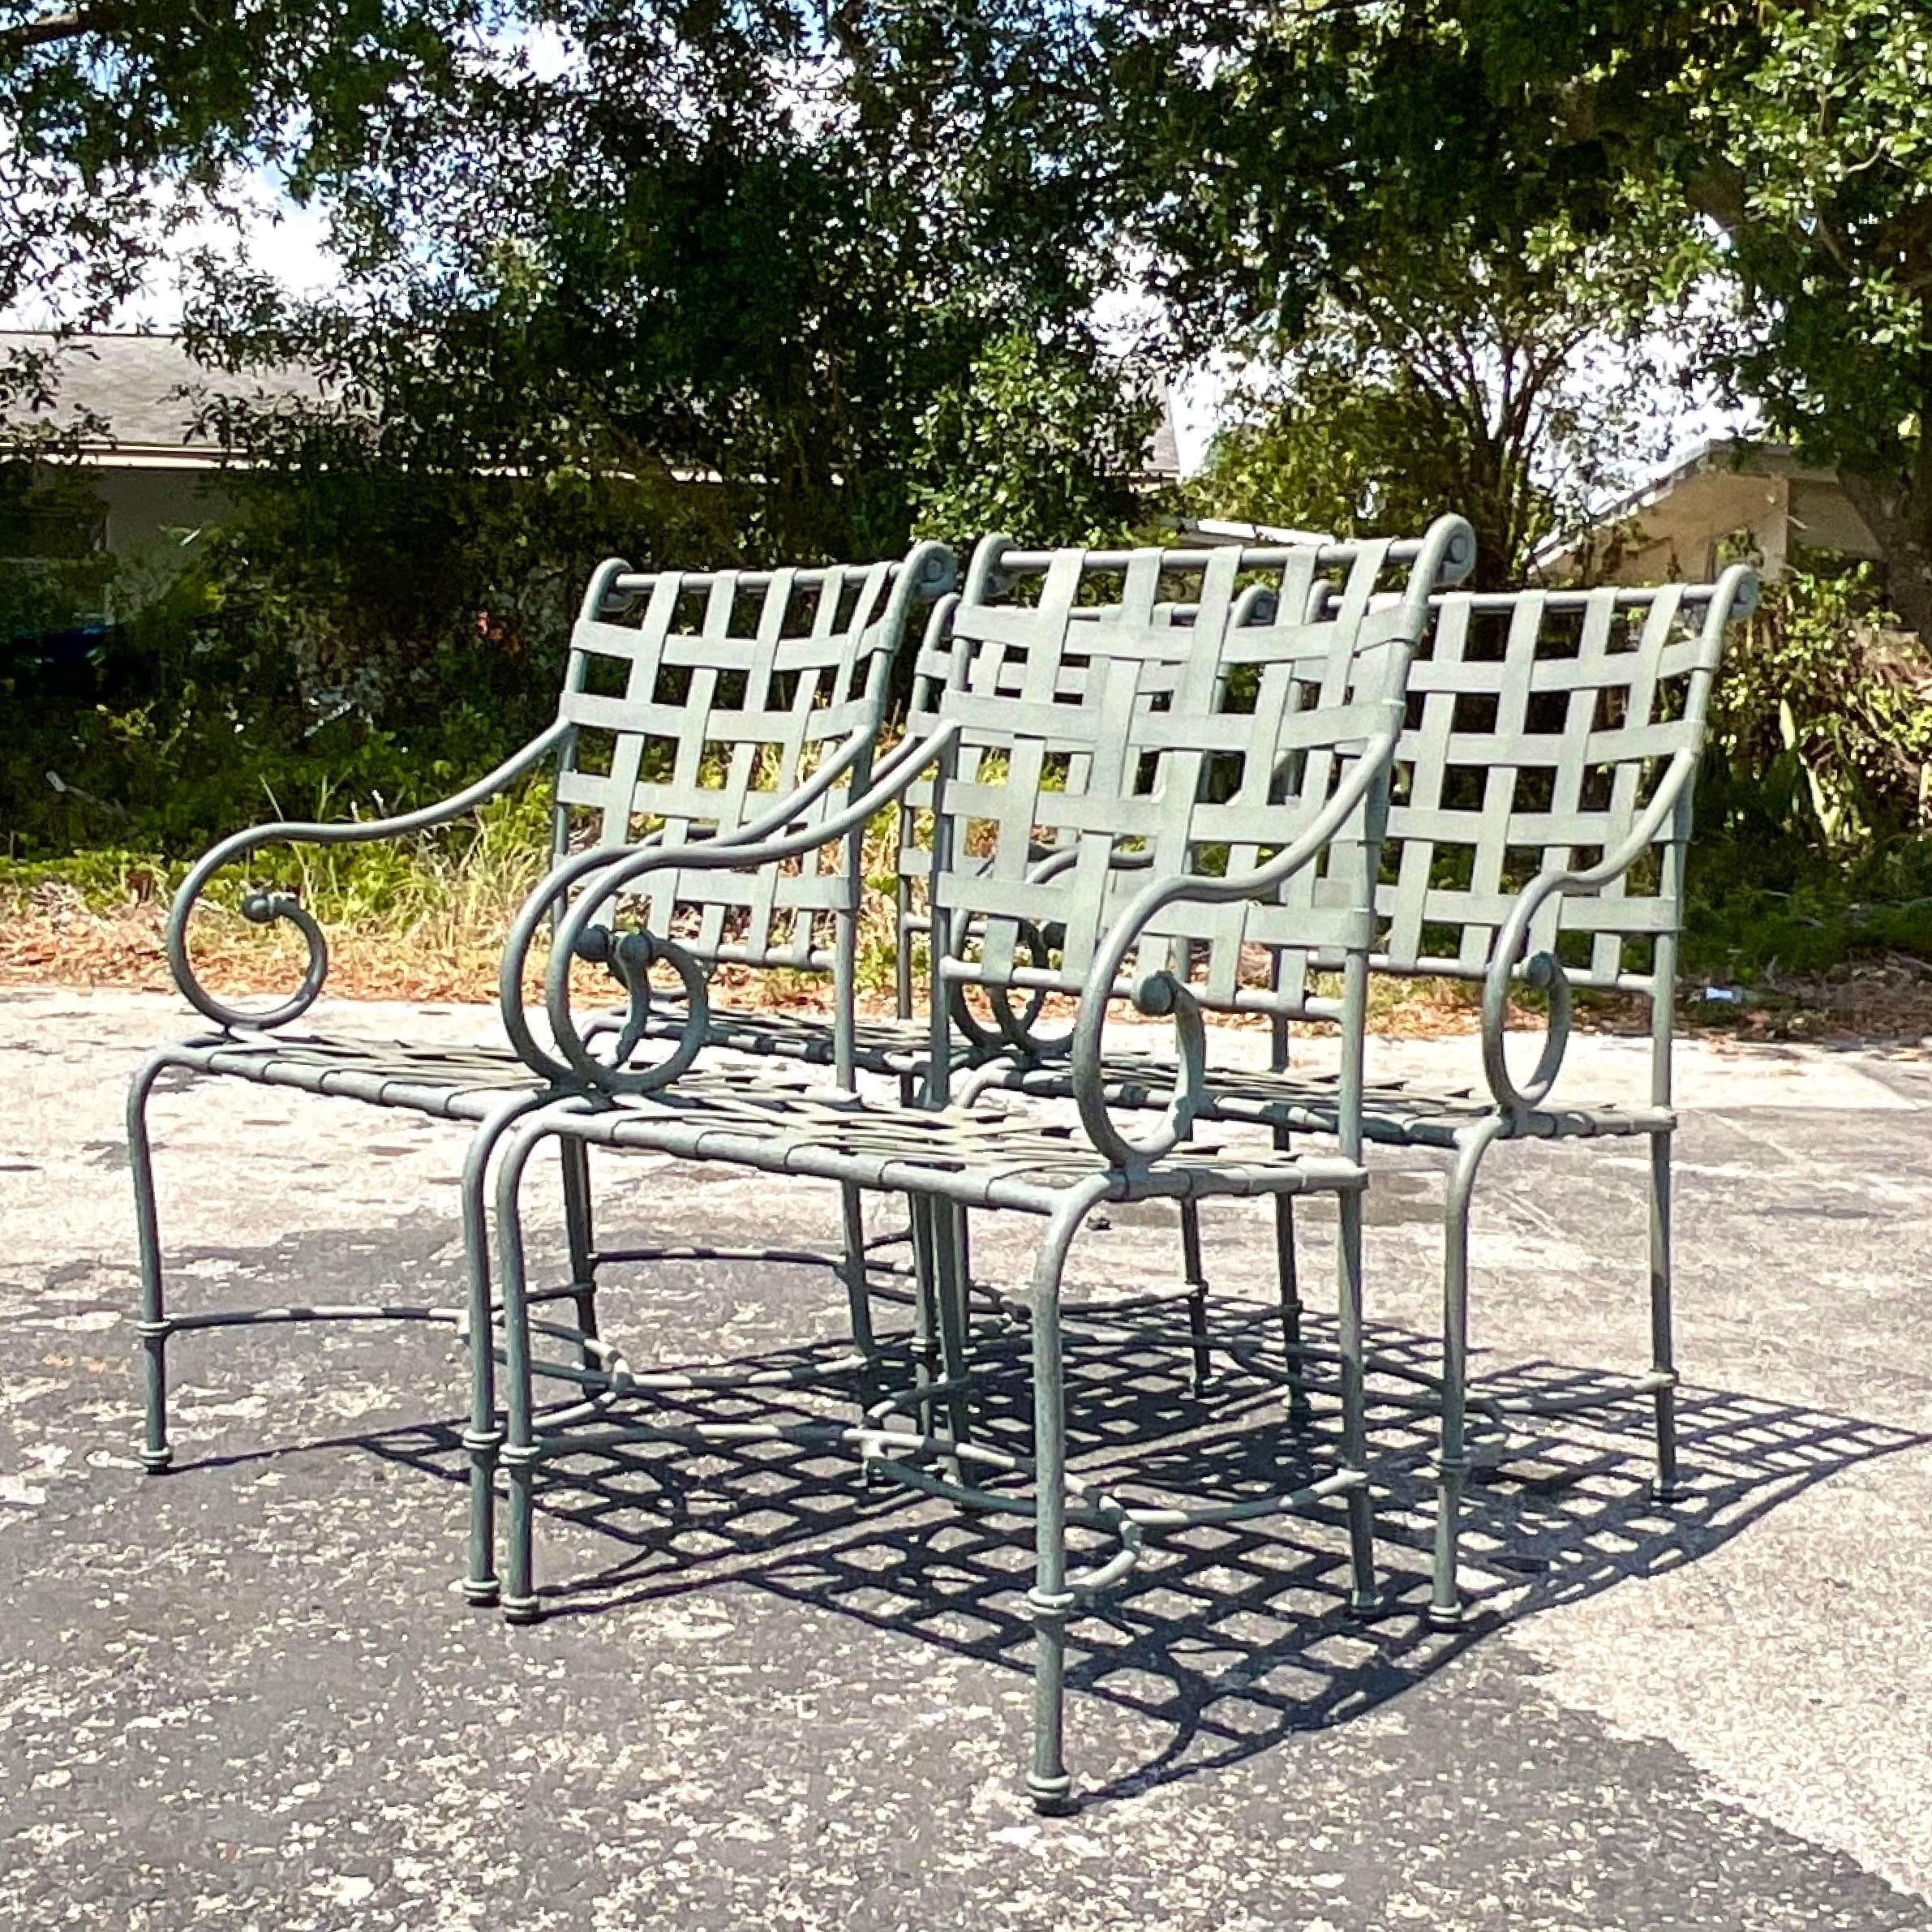 A fantastic vintage Coastal outdoor dining set. Made by the iconic Brown Jordan group. The popular Venetian collection in cast aluminum. Four arm chairs and one glass top dining table. Acquired from a Palm Beach estate.